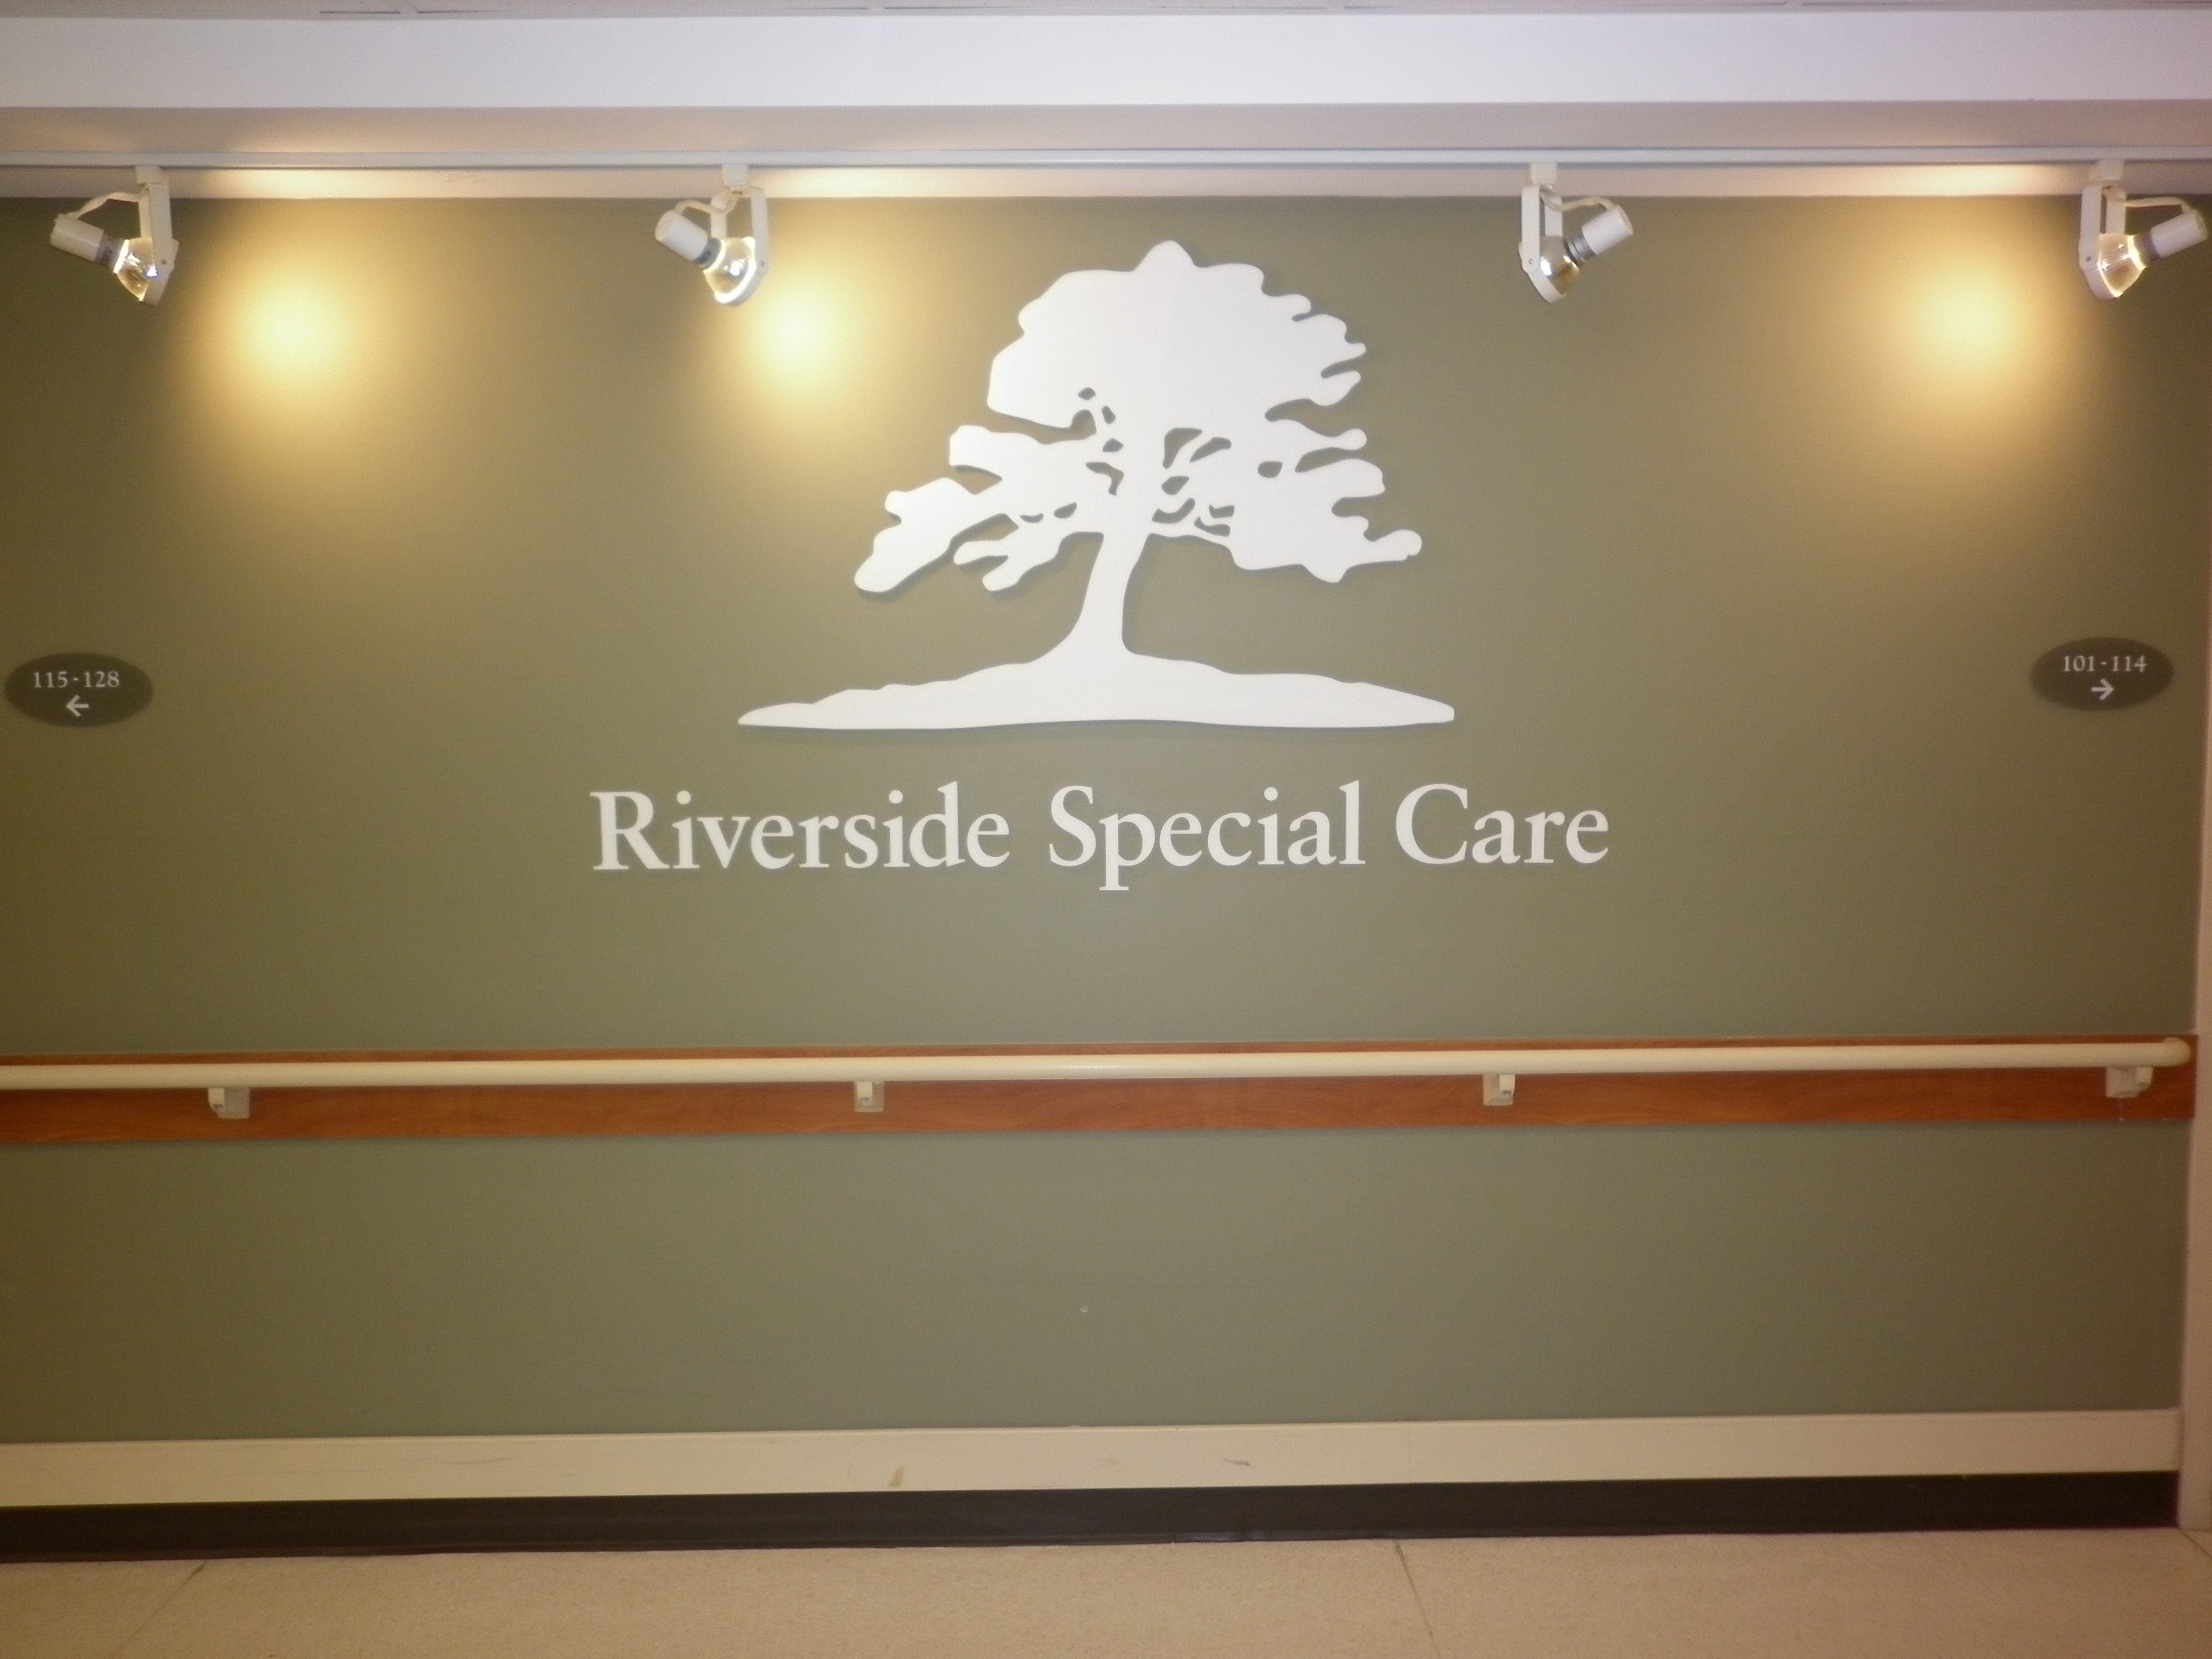 Riverside Special Care